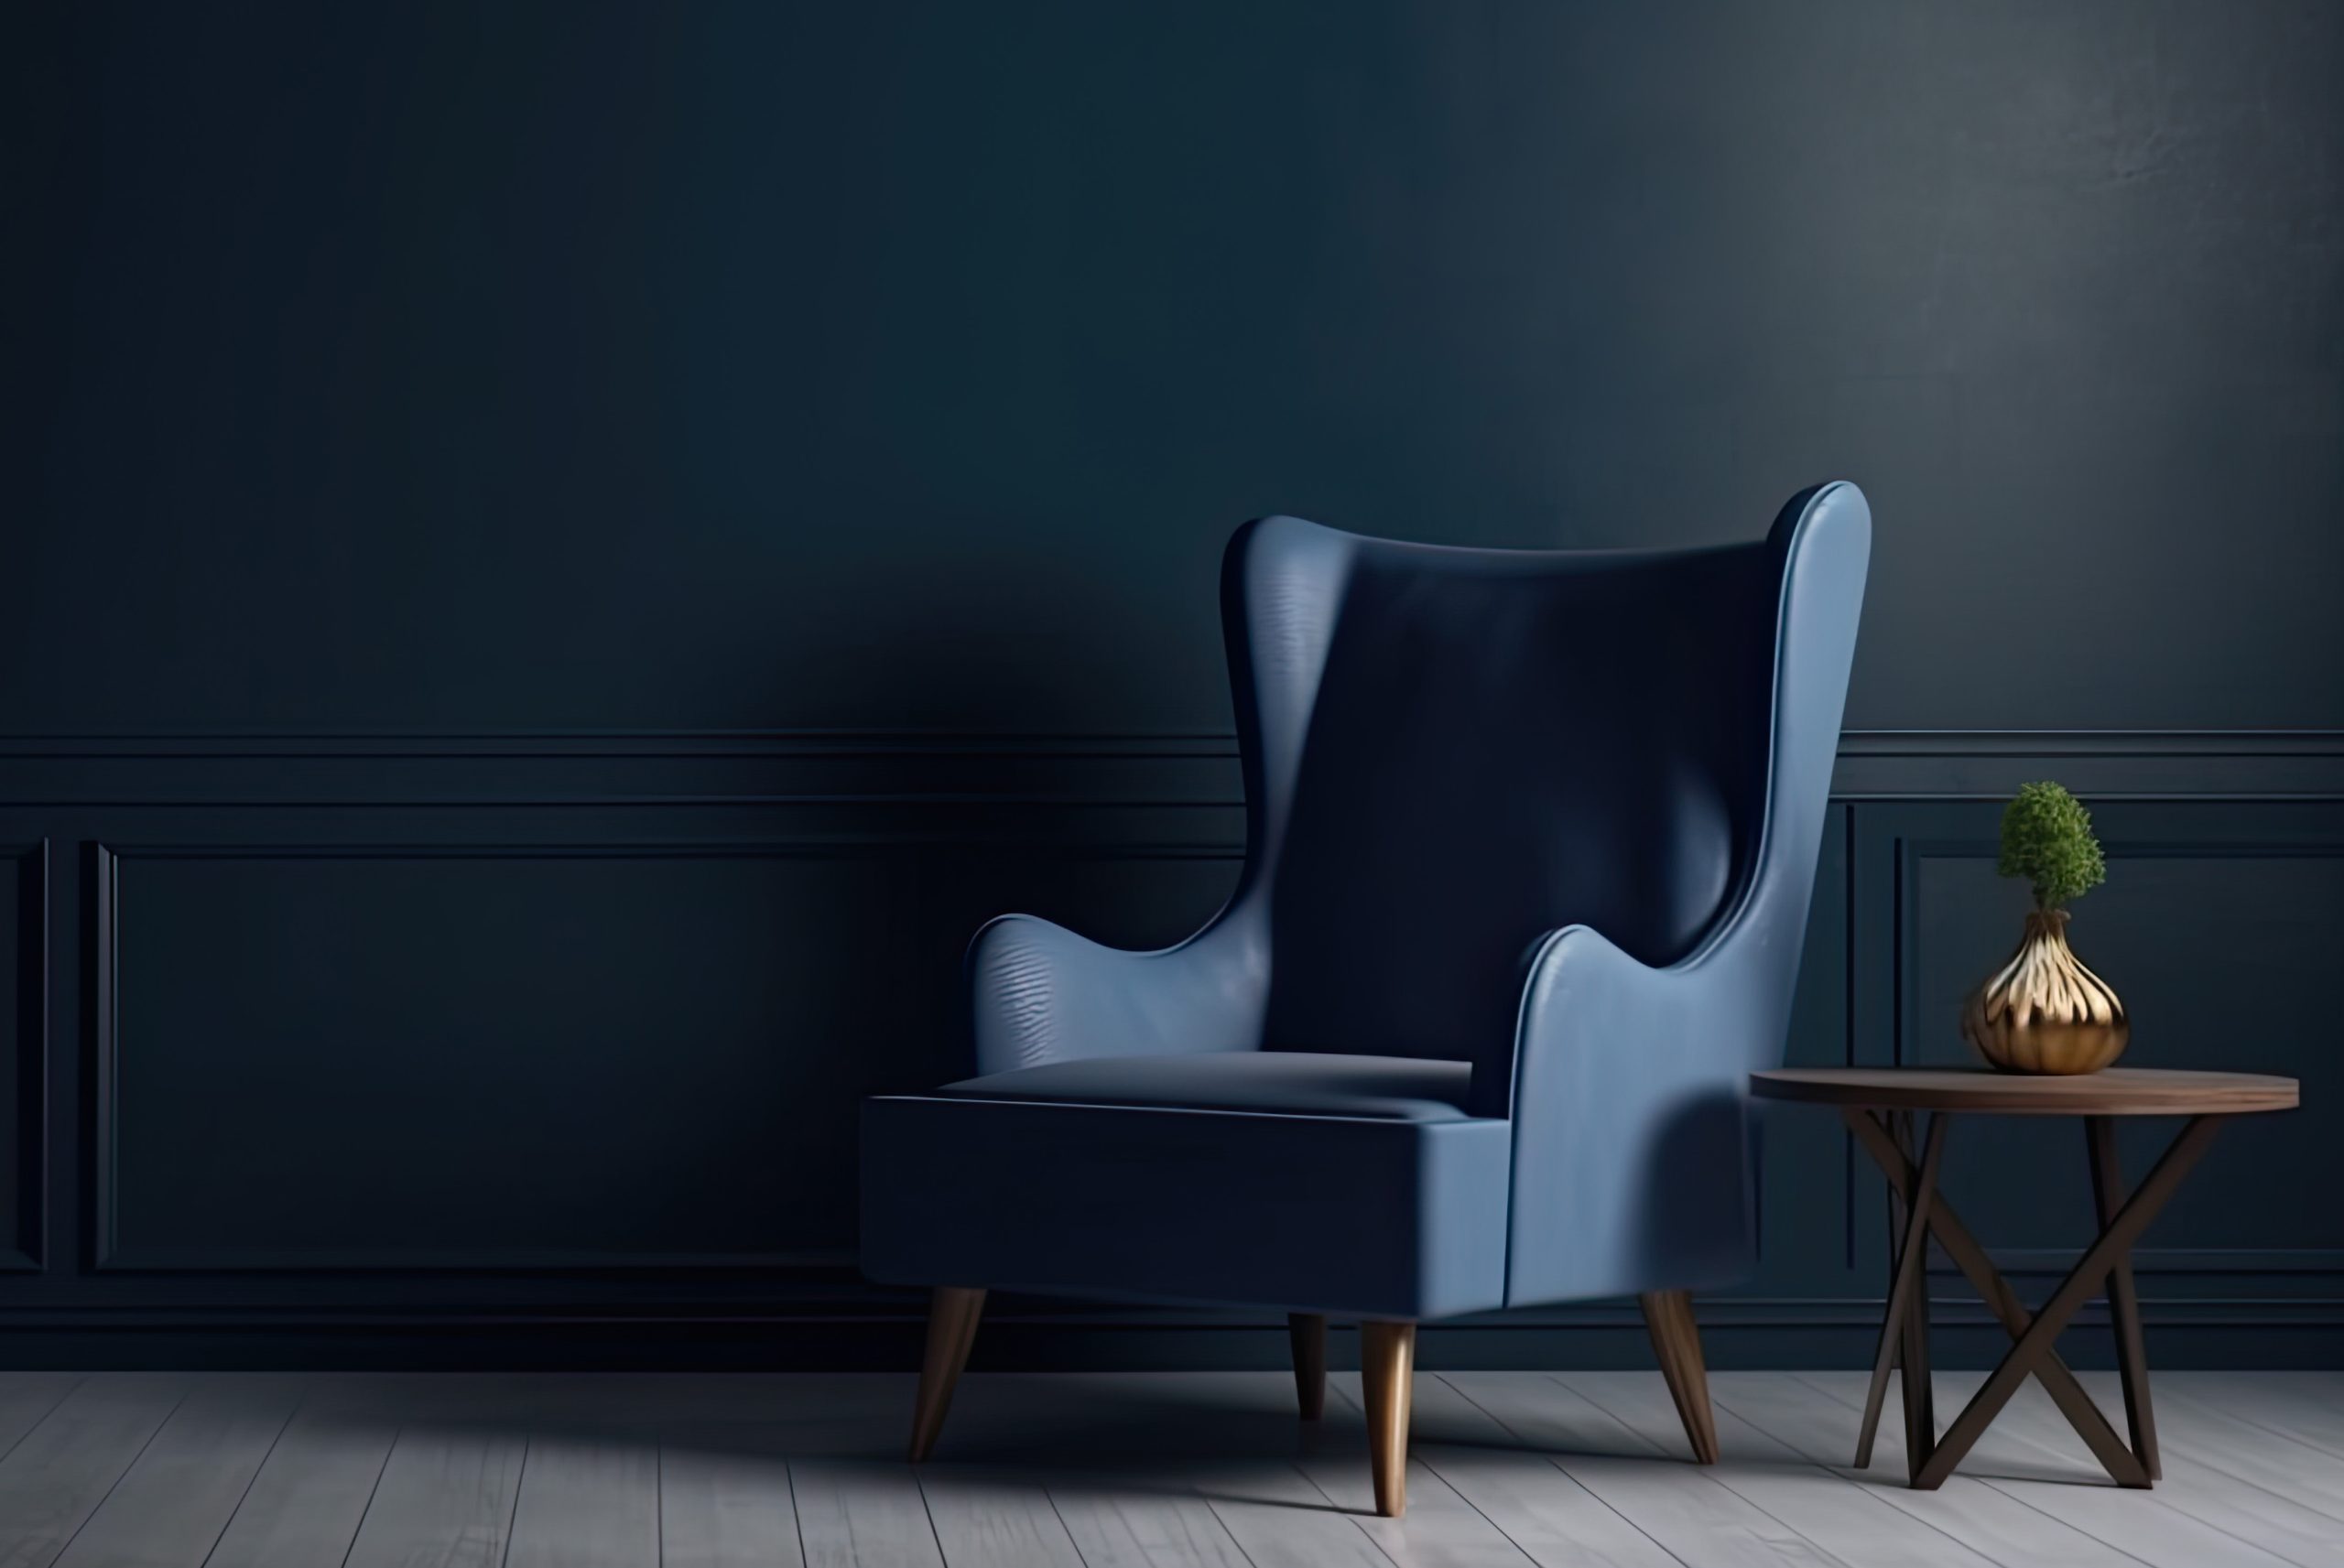 Blue armchair against blue wall in living room interior. Elegant interior design with copy space.